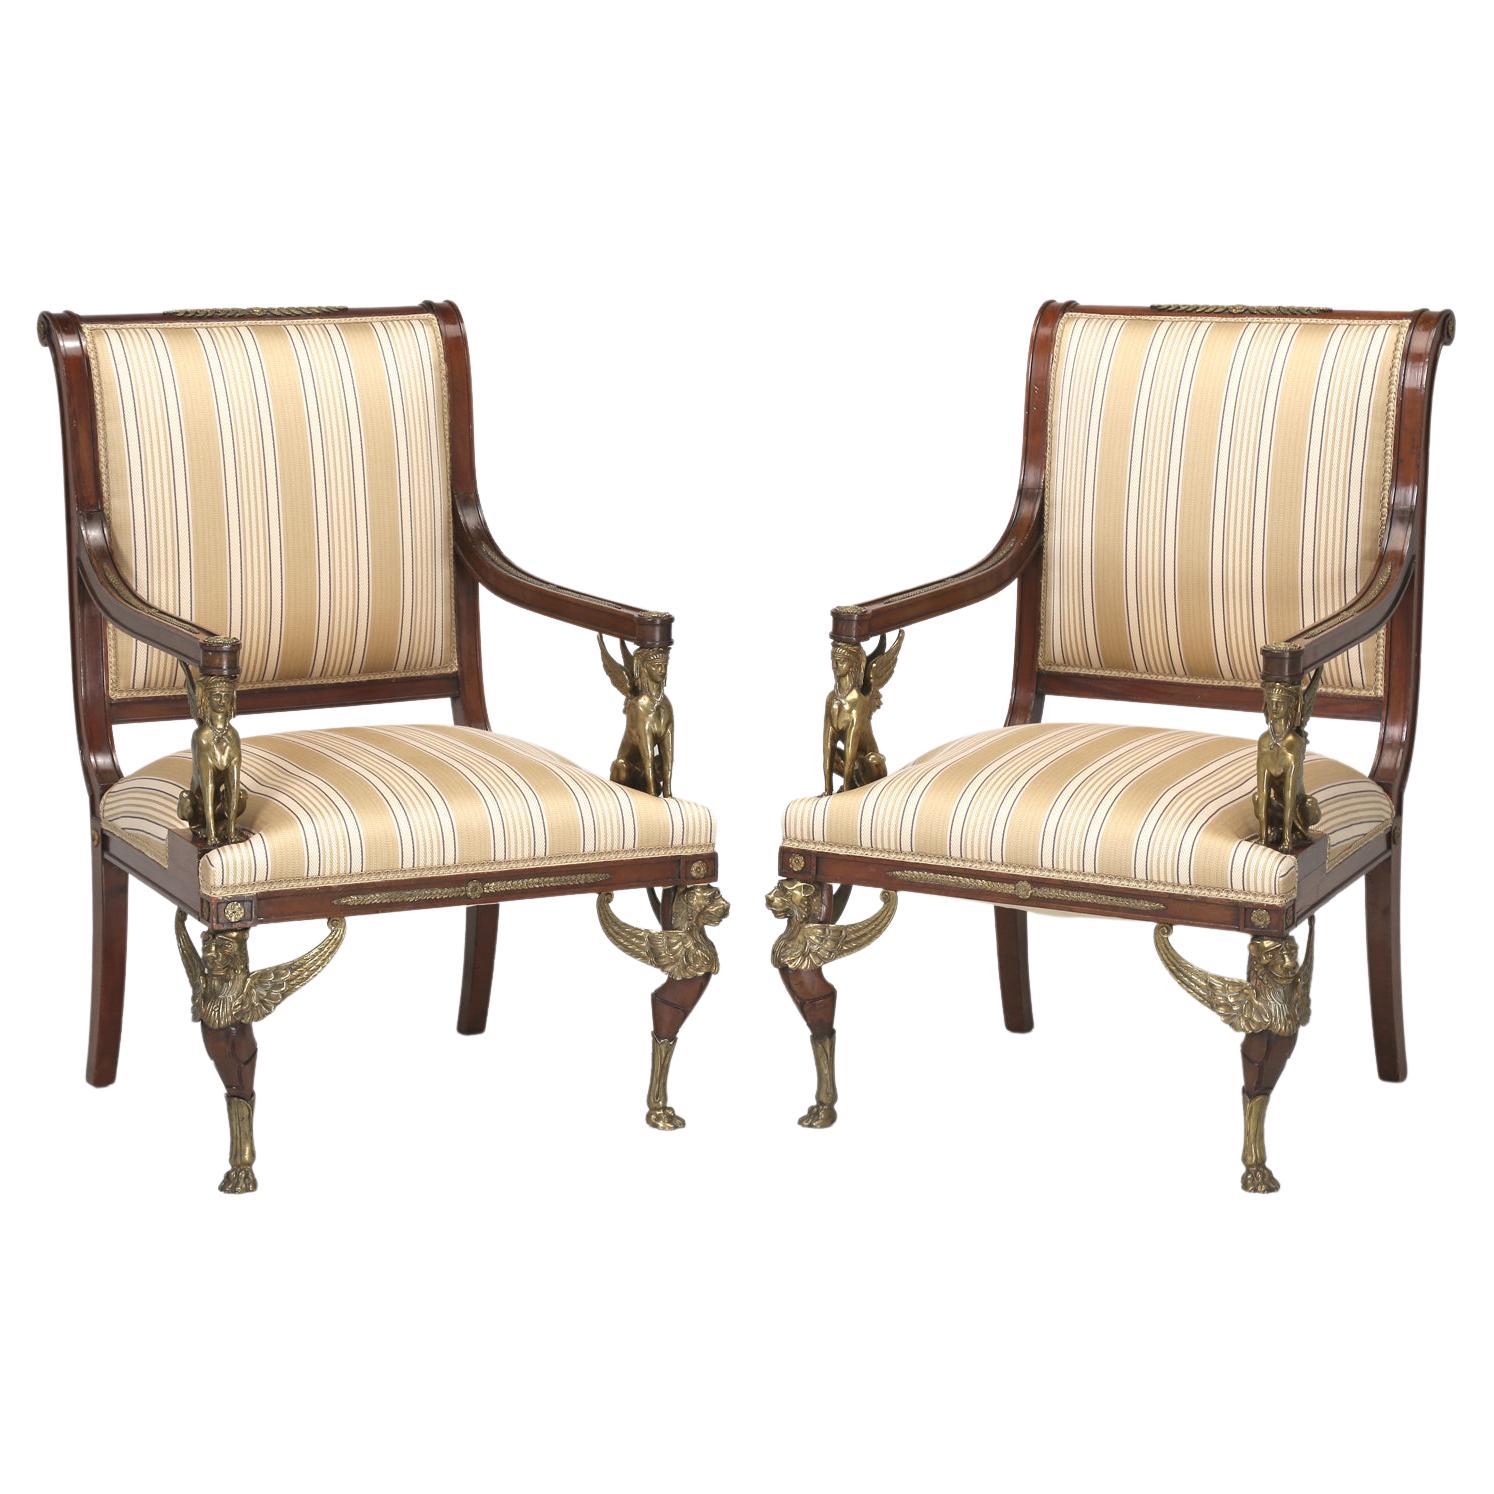 Antique French Empire Revival Arm Chairs Mahogany with Exceptional Quality c1840 For Sale